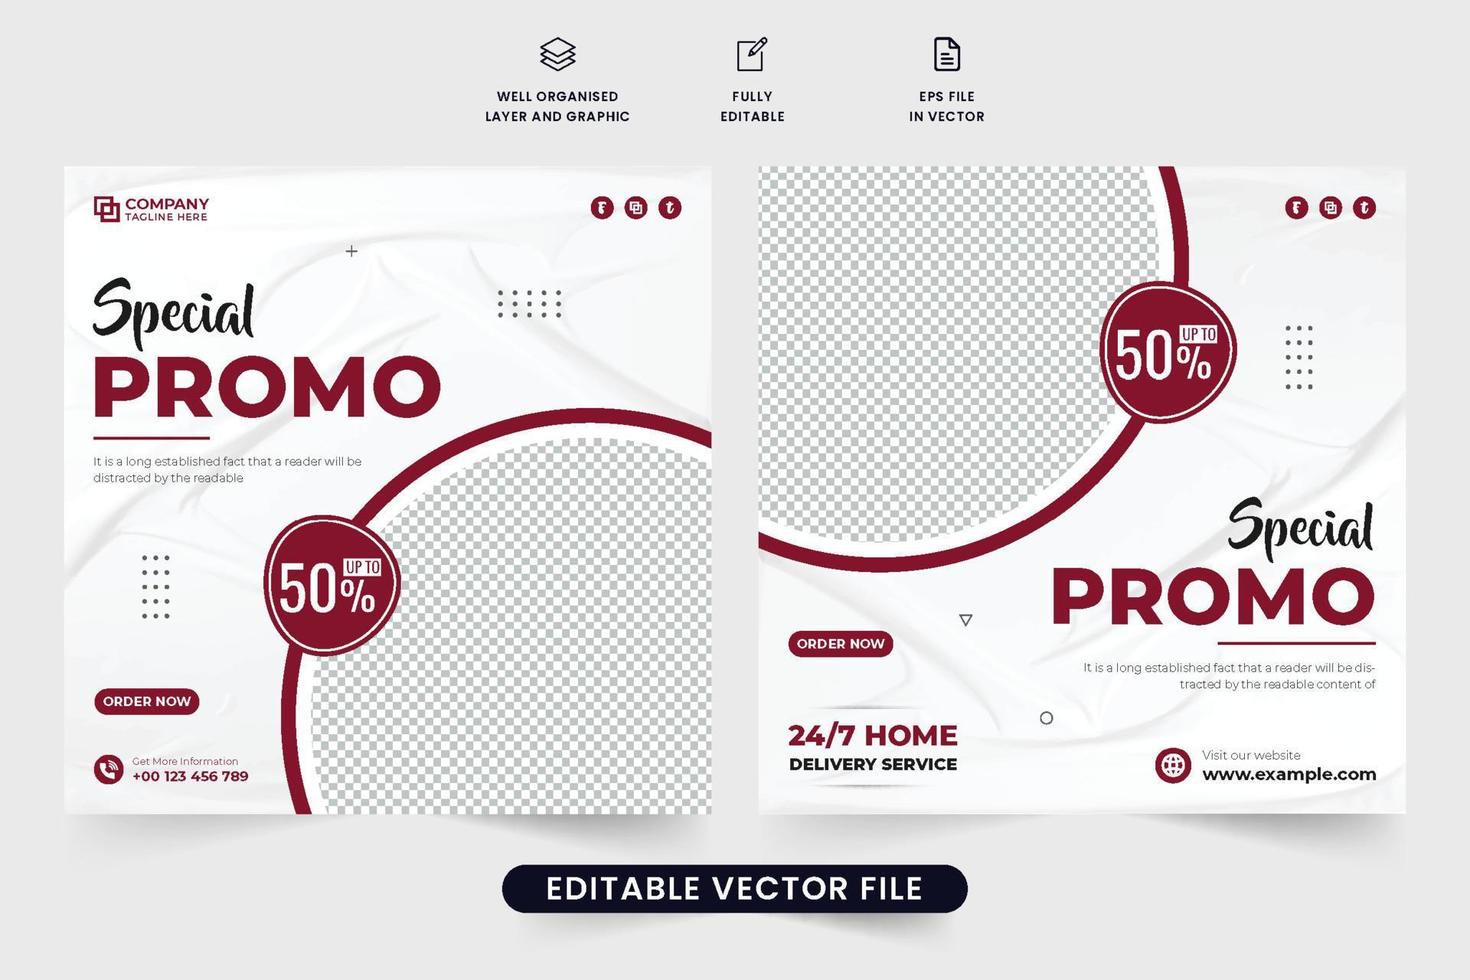 Food promo template social media post vector with red wine color. Special food menu promotional web banner design for social media marketing. Food discount template design with abstract shapes.